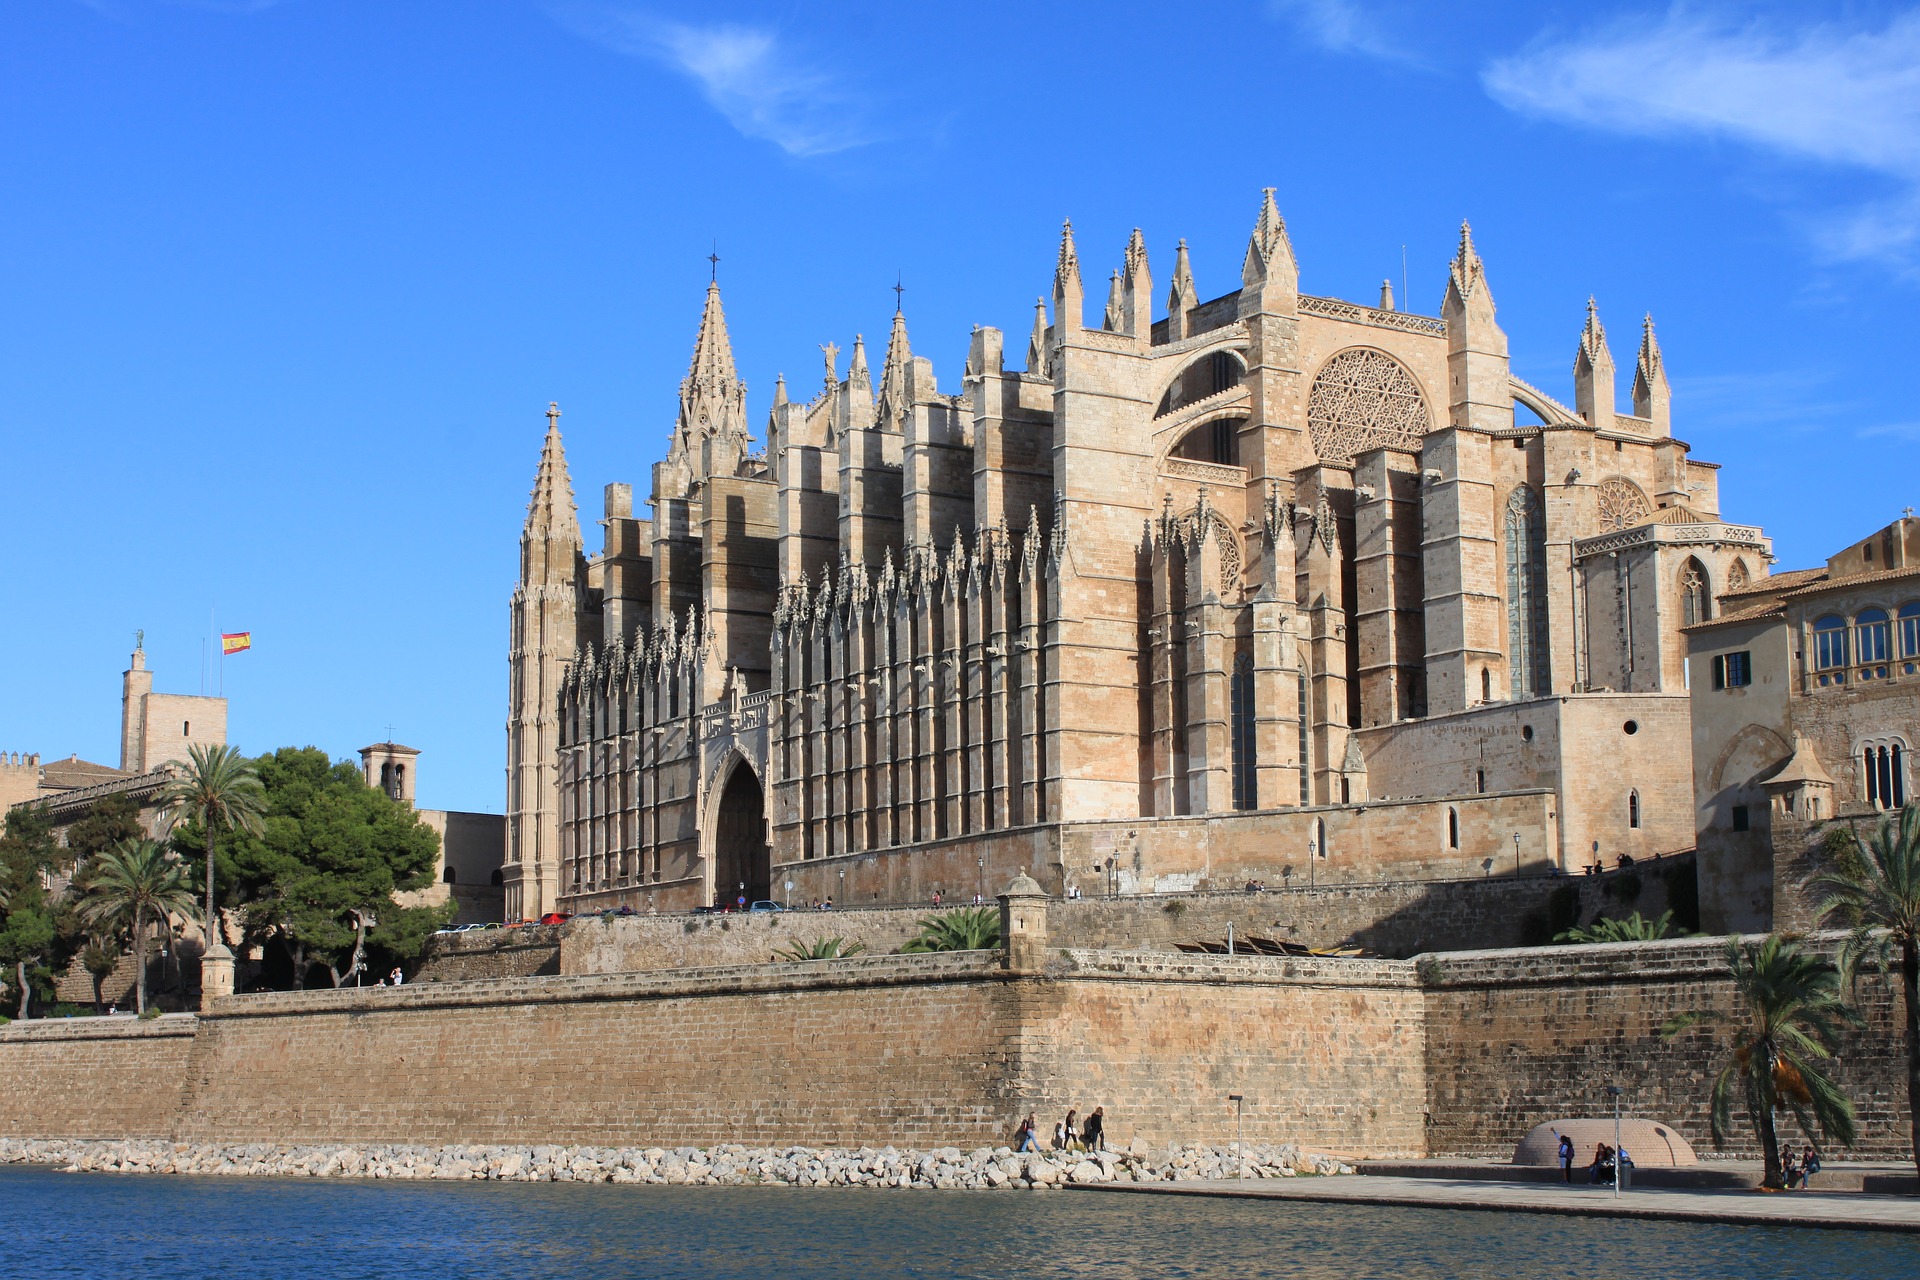 Things to do in Palma de Mallorca - Visit the Cathedral